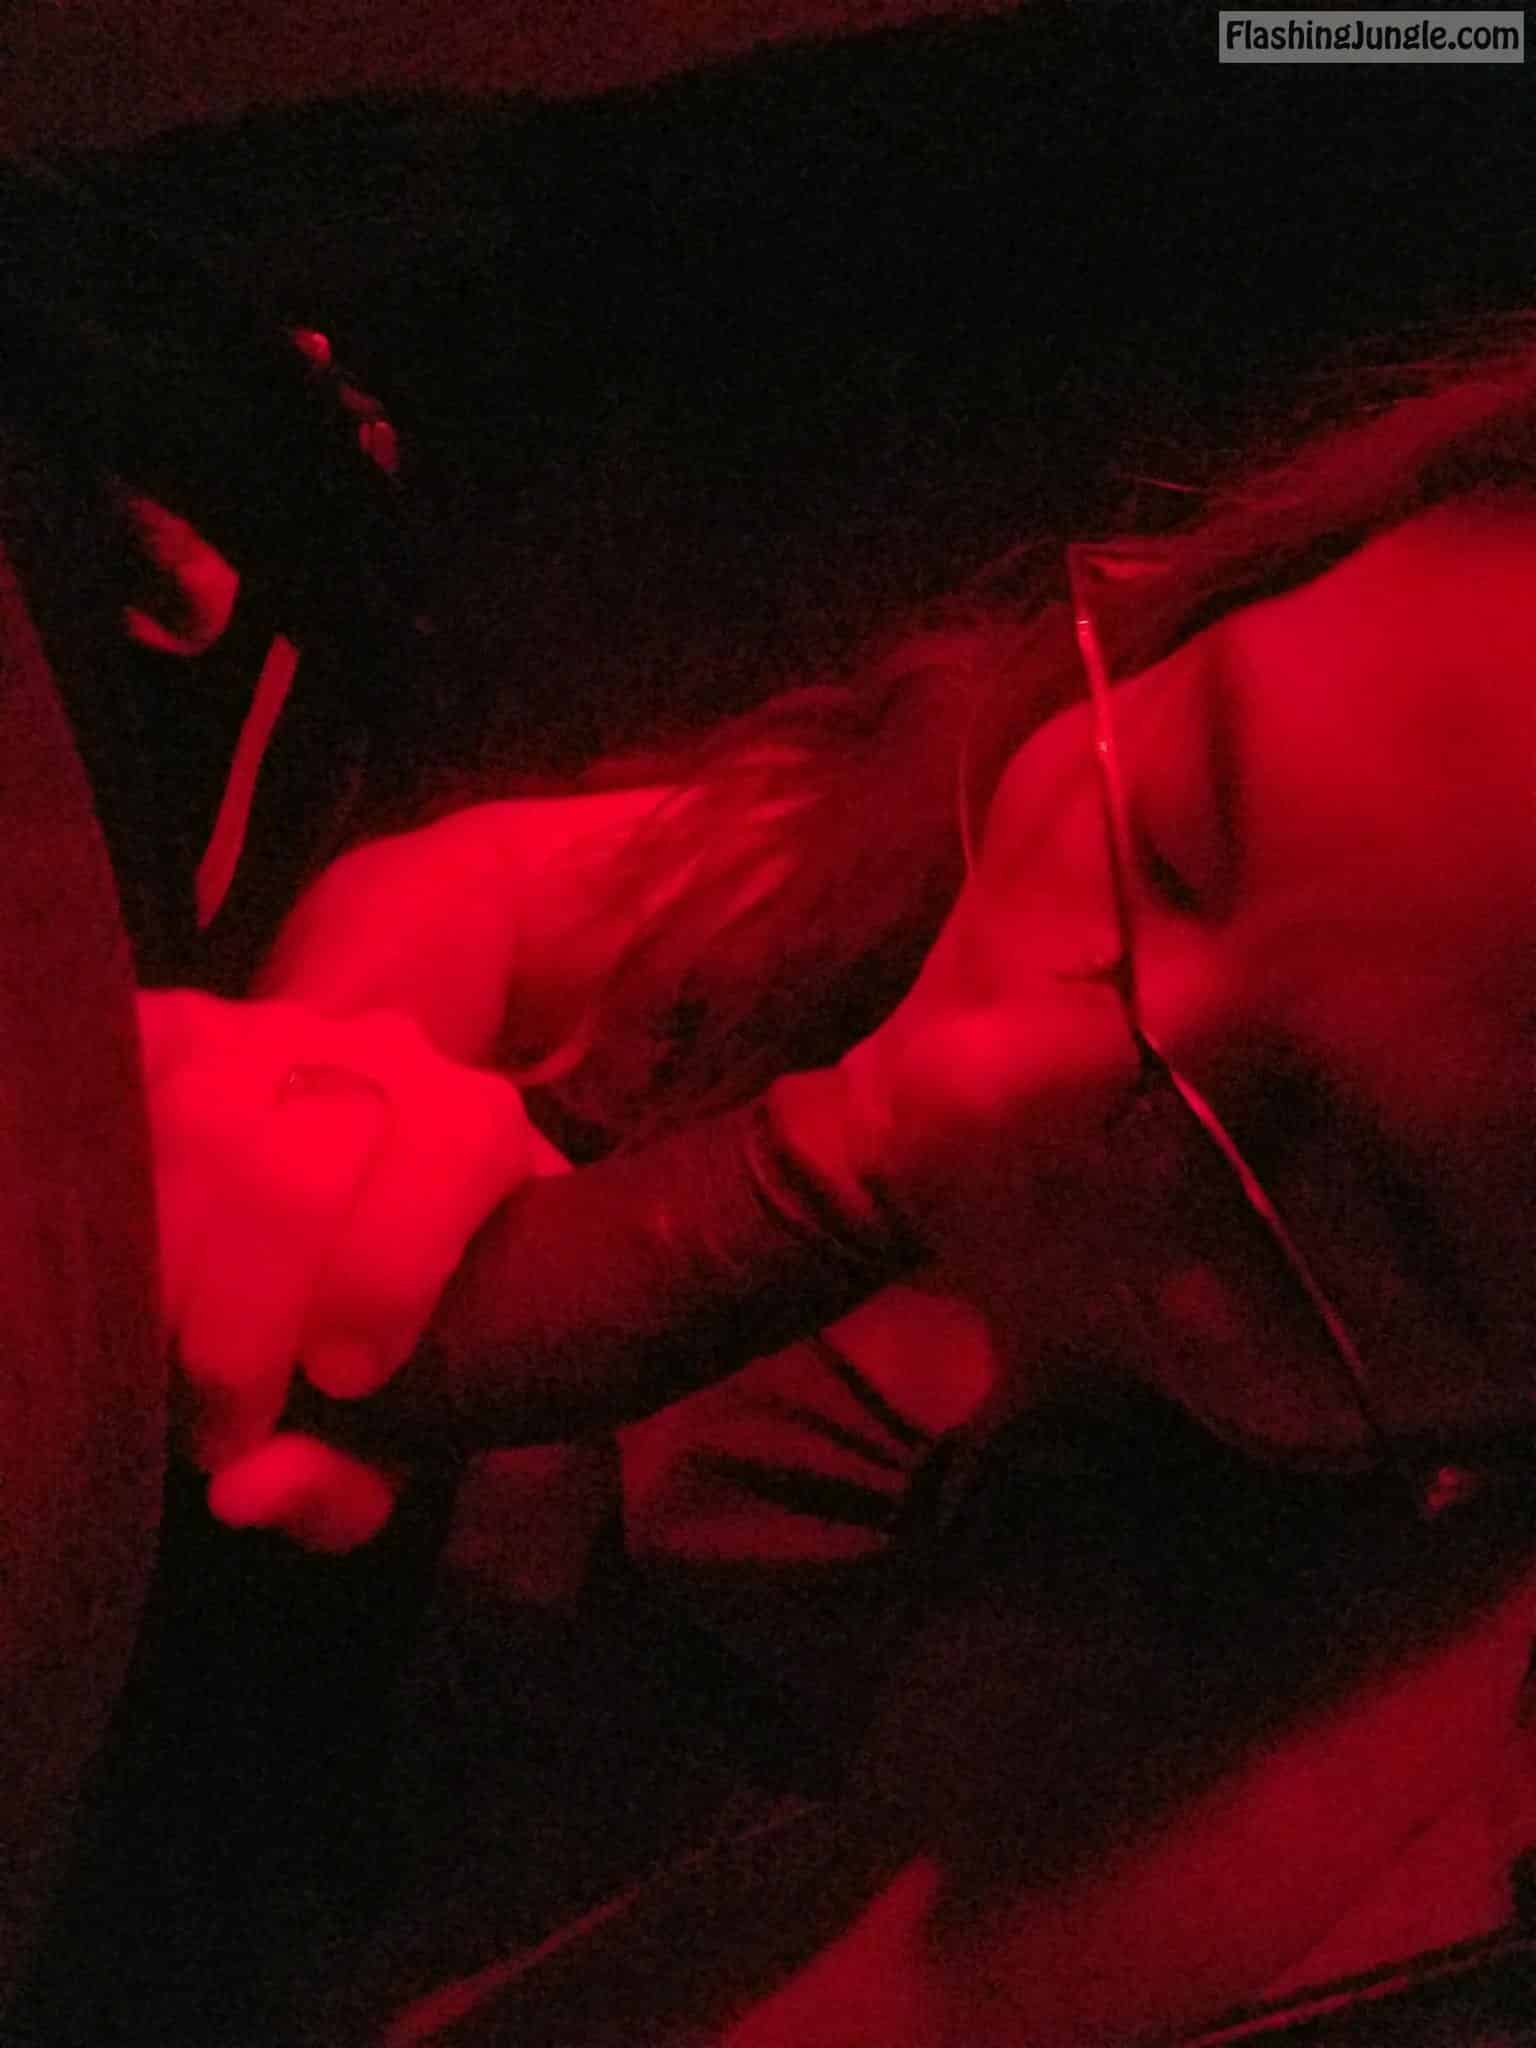 hotwife gallery - Hotwife Blowjob Under Redlight POV Hotwife with glasses sucking black cock under redlight. - Hotwife Pics